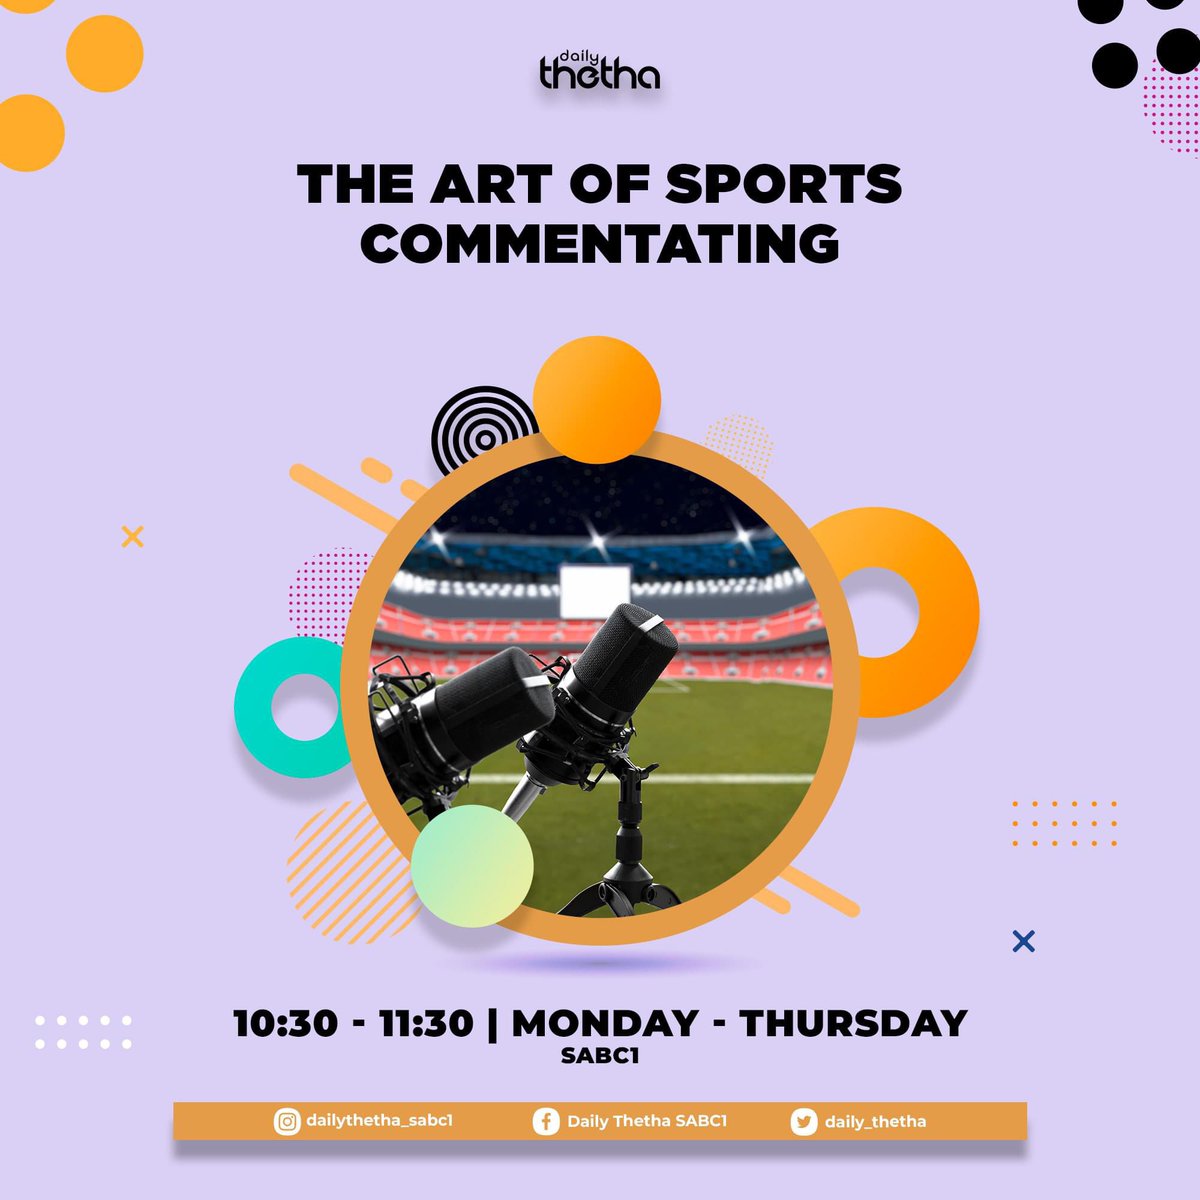 Sports commentating is a vibrant and dynamic field that is deeply ingrained in sports culture.

Join the Conversation on Daily Thetha from 10h30 every Monday to Thursday on SABC1.

#SABCEducation